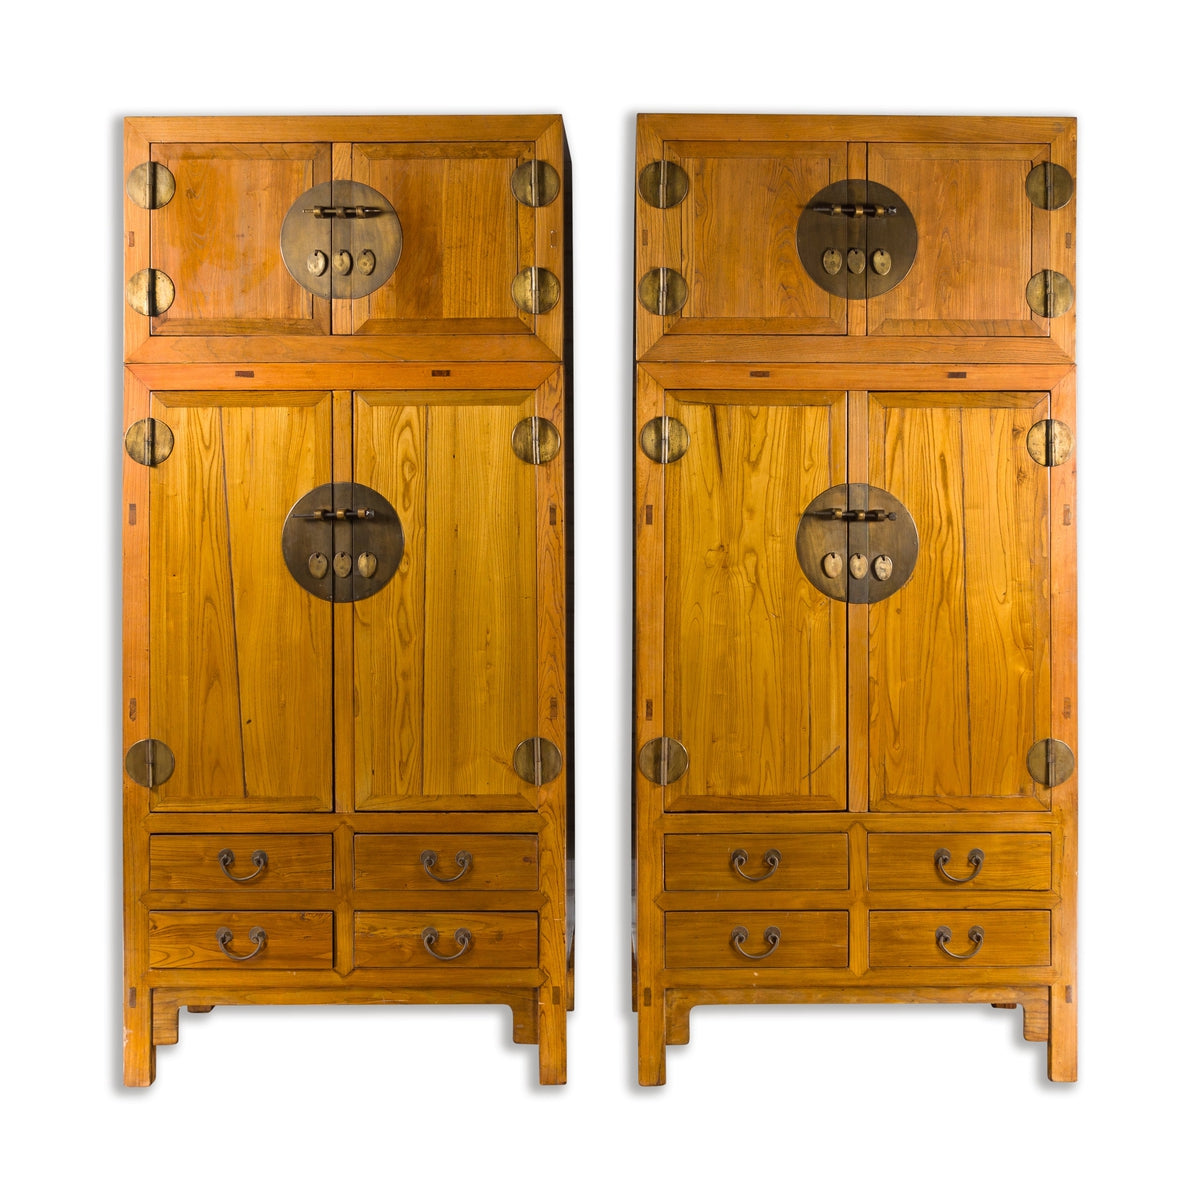 Antique Japanese Tansu Cabinets - a Pair